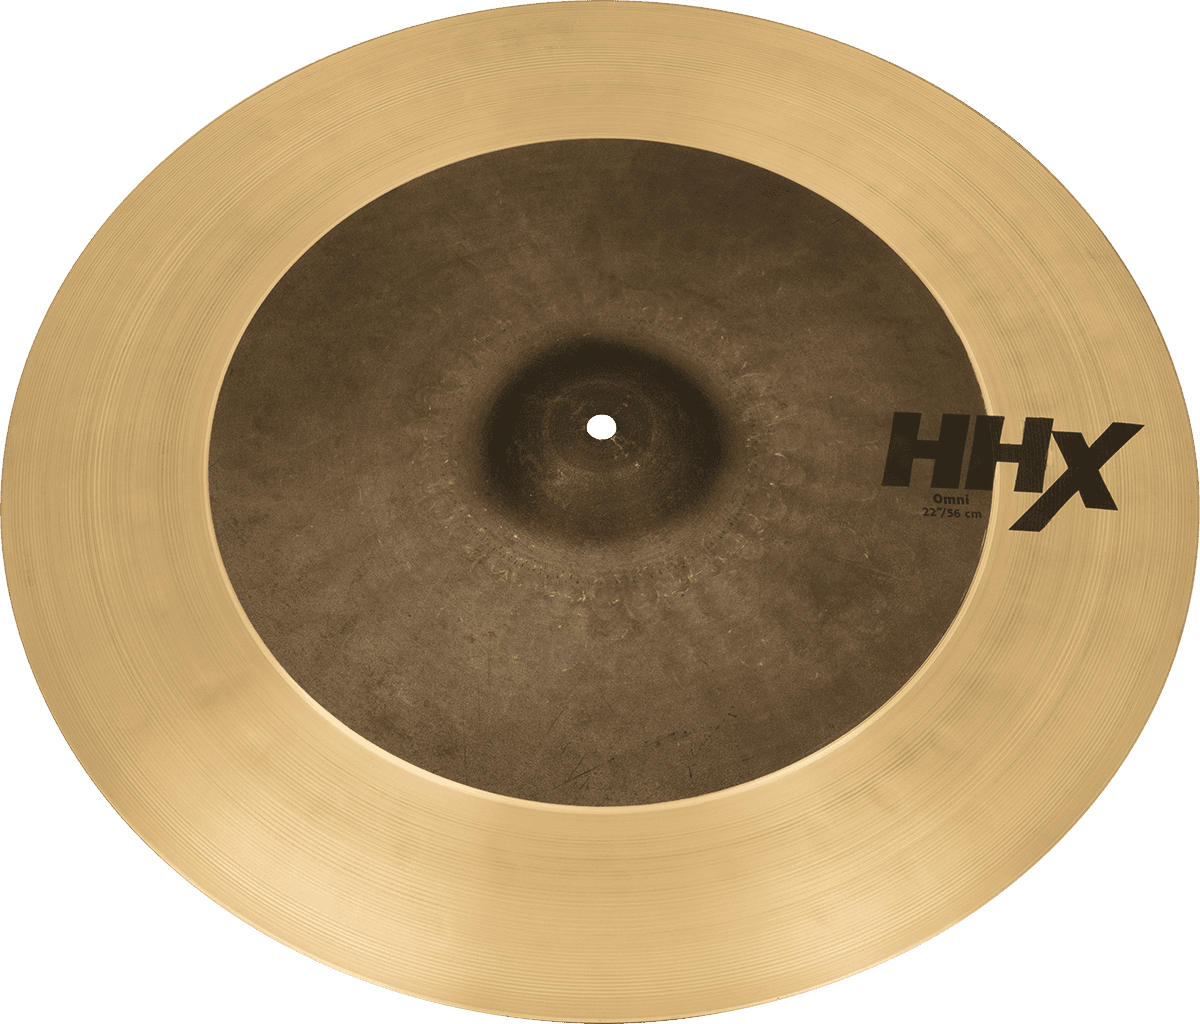 Sabian Hhx Omni Ride - 22 Pouces - Ride cymbal - Main picture